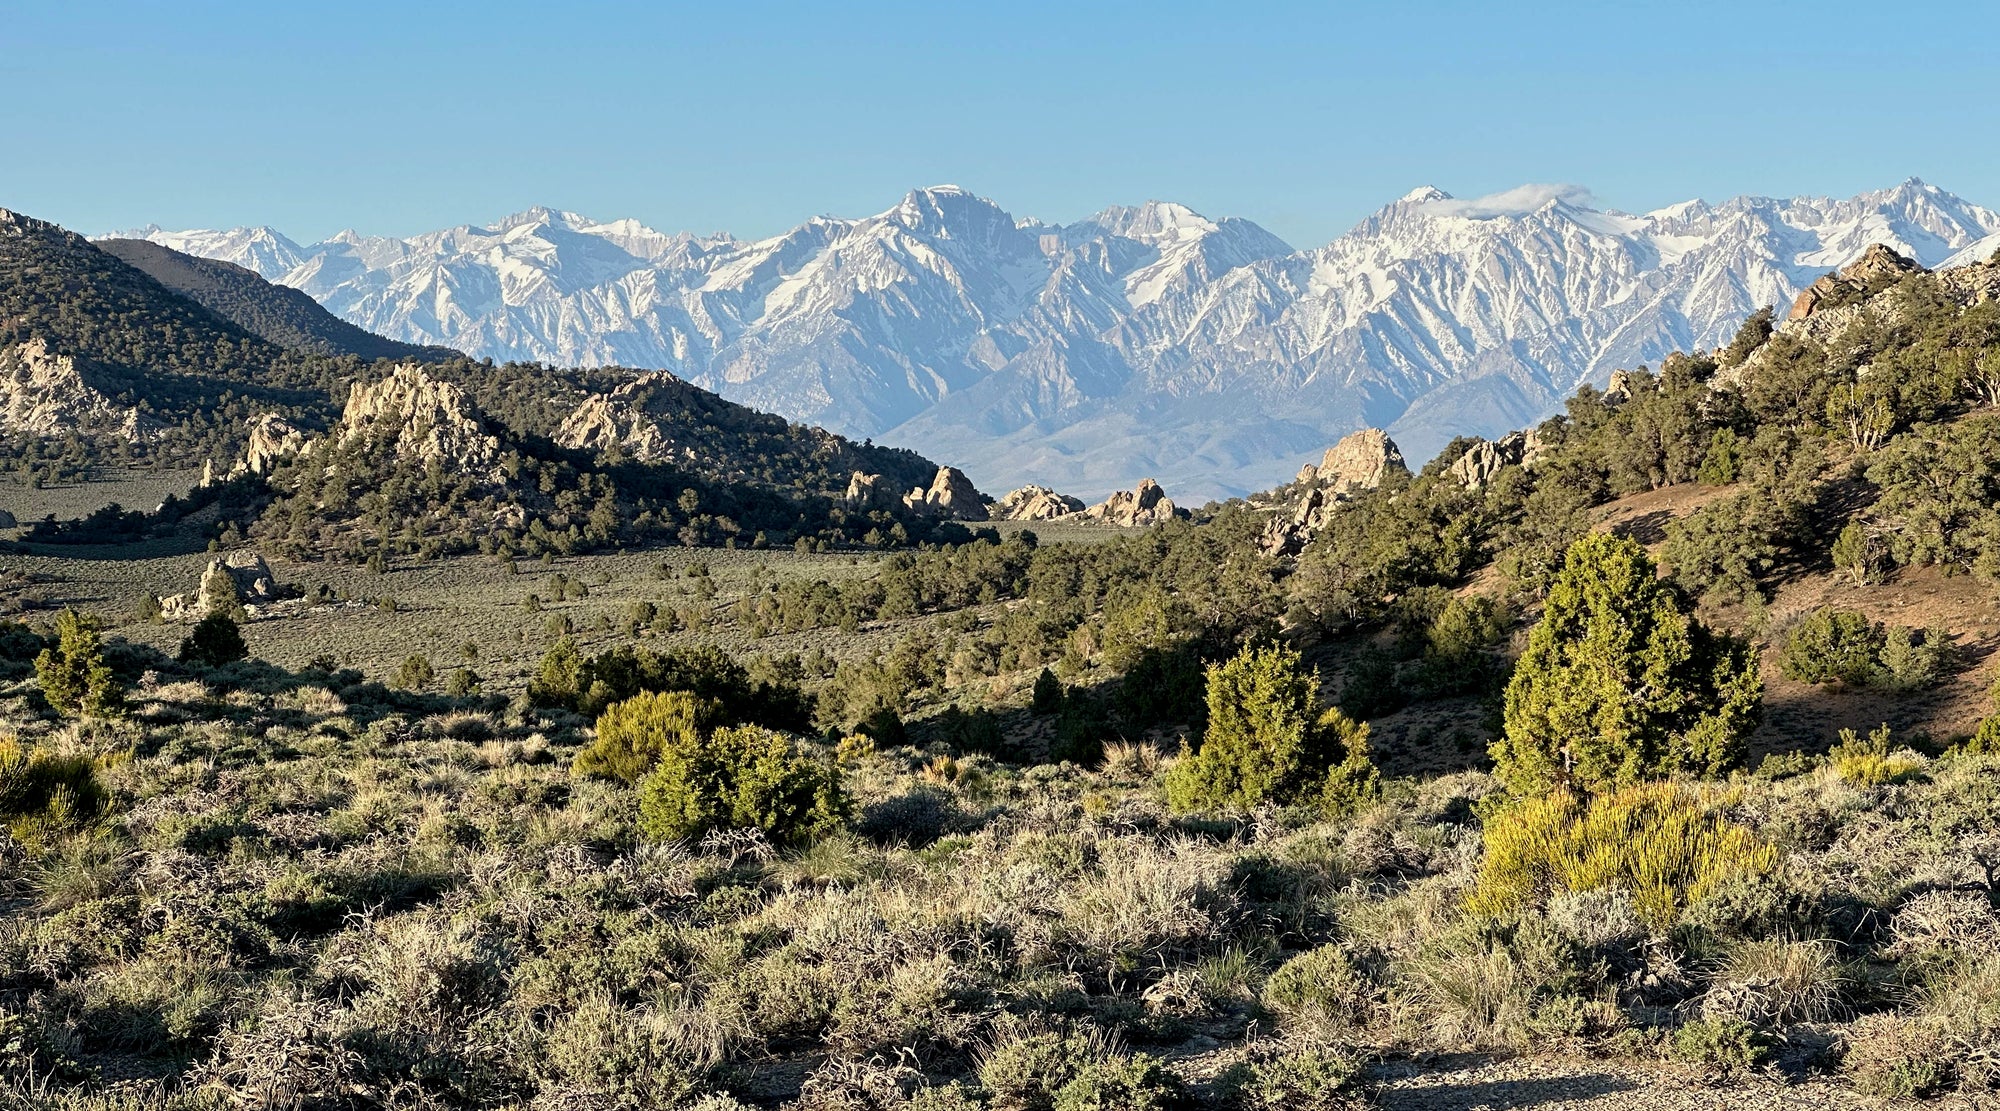 The Sierra Crest as viewed from the Inyo Mountains